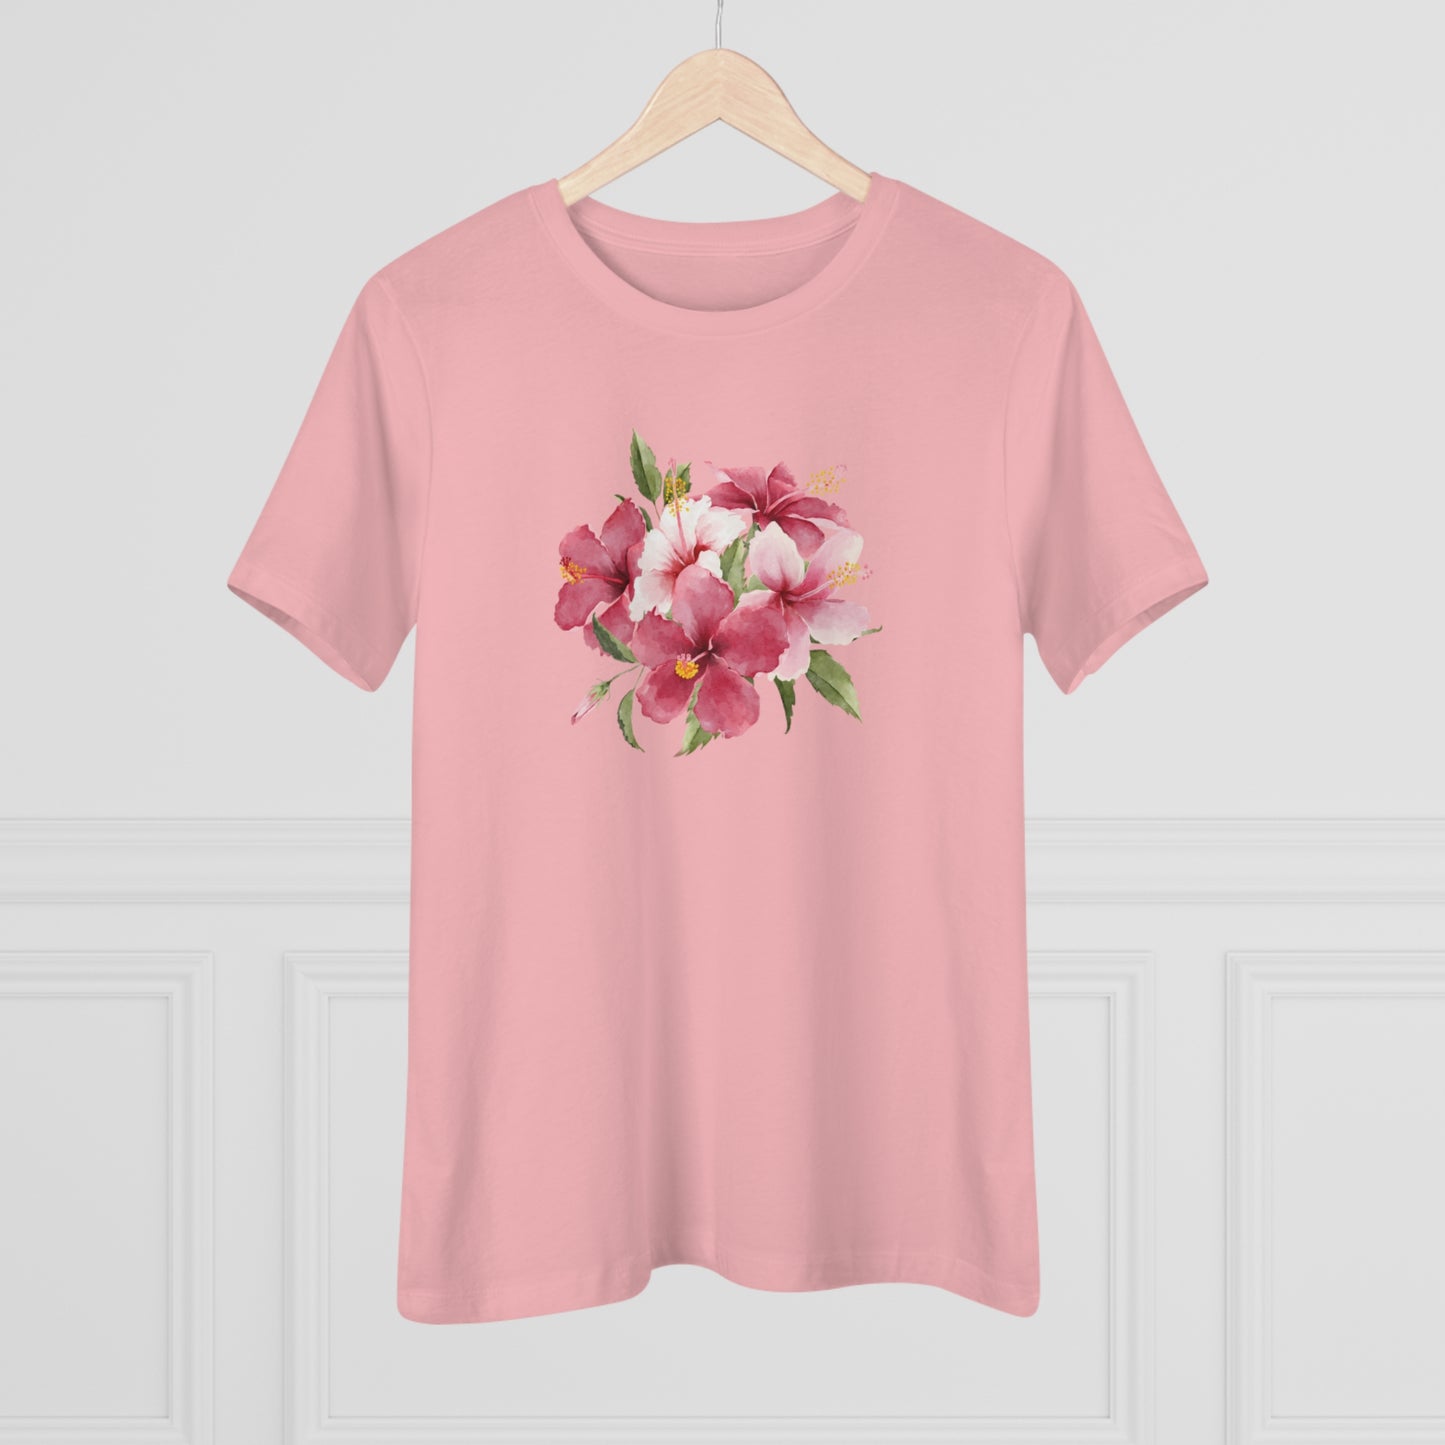 Mock up of our pink t-shirt on a wooden hanger